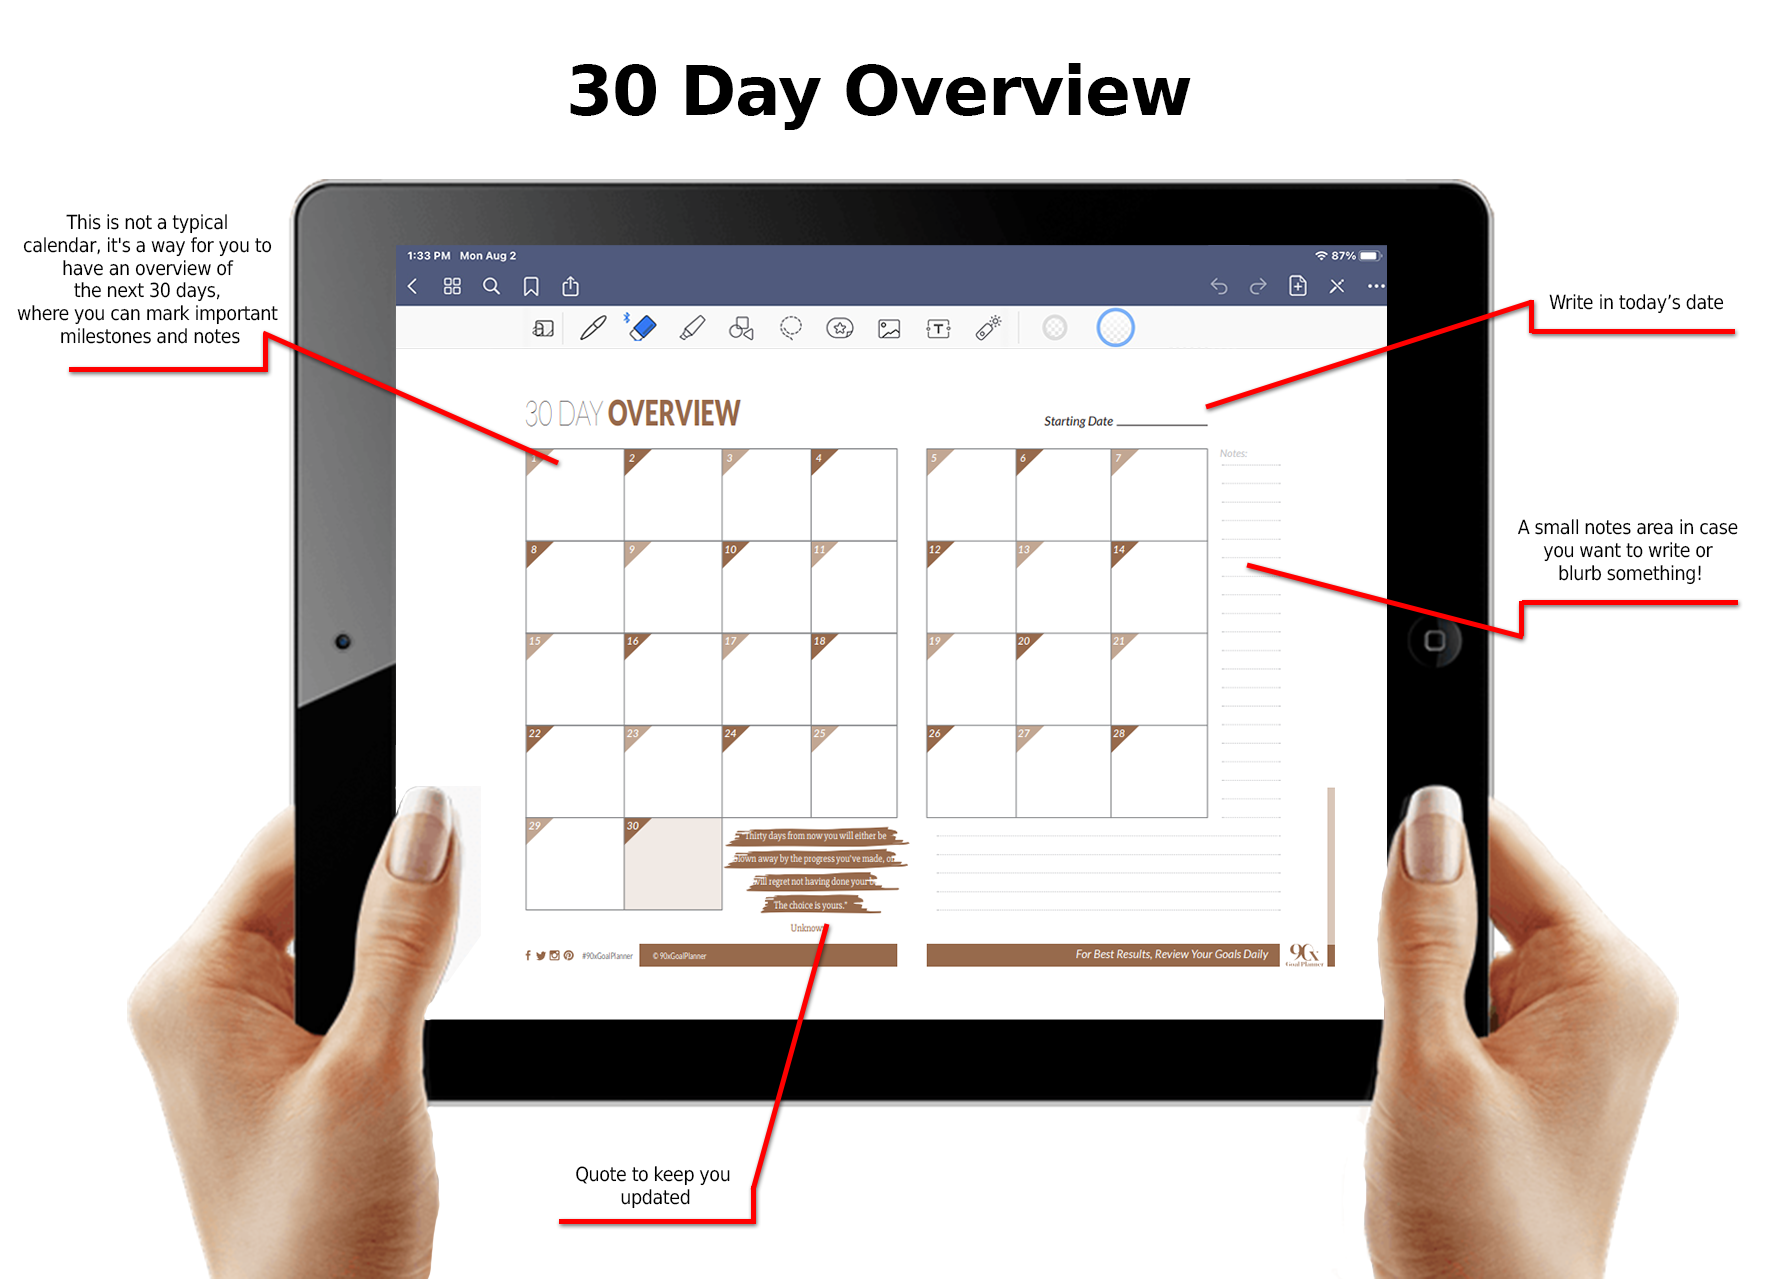 11 PDF Collection - 4 90X® Digital Planners & 7-Step Goal Strategy System